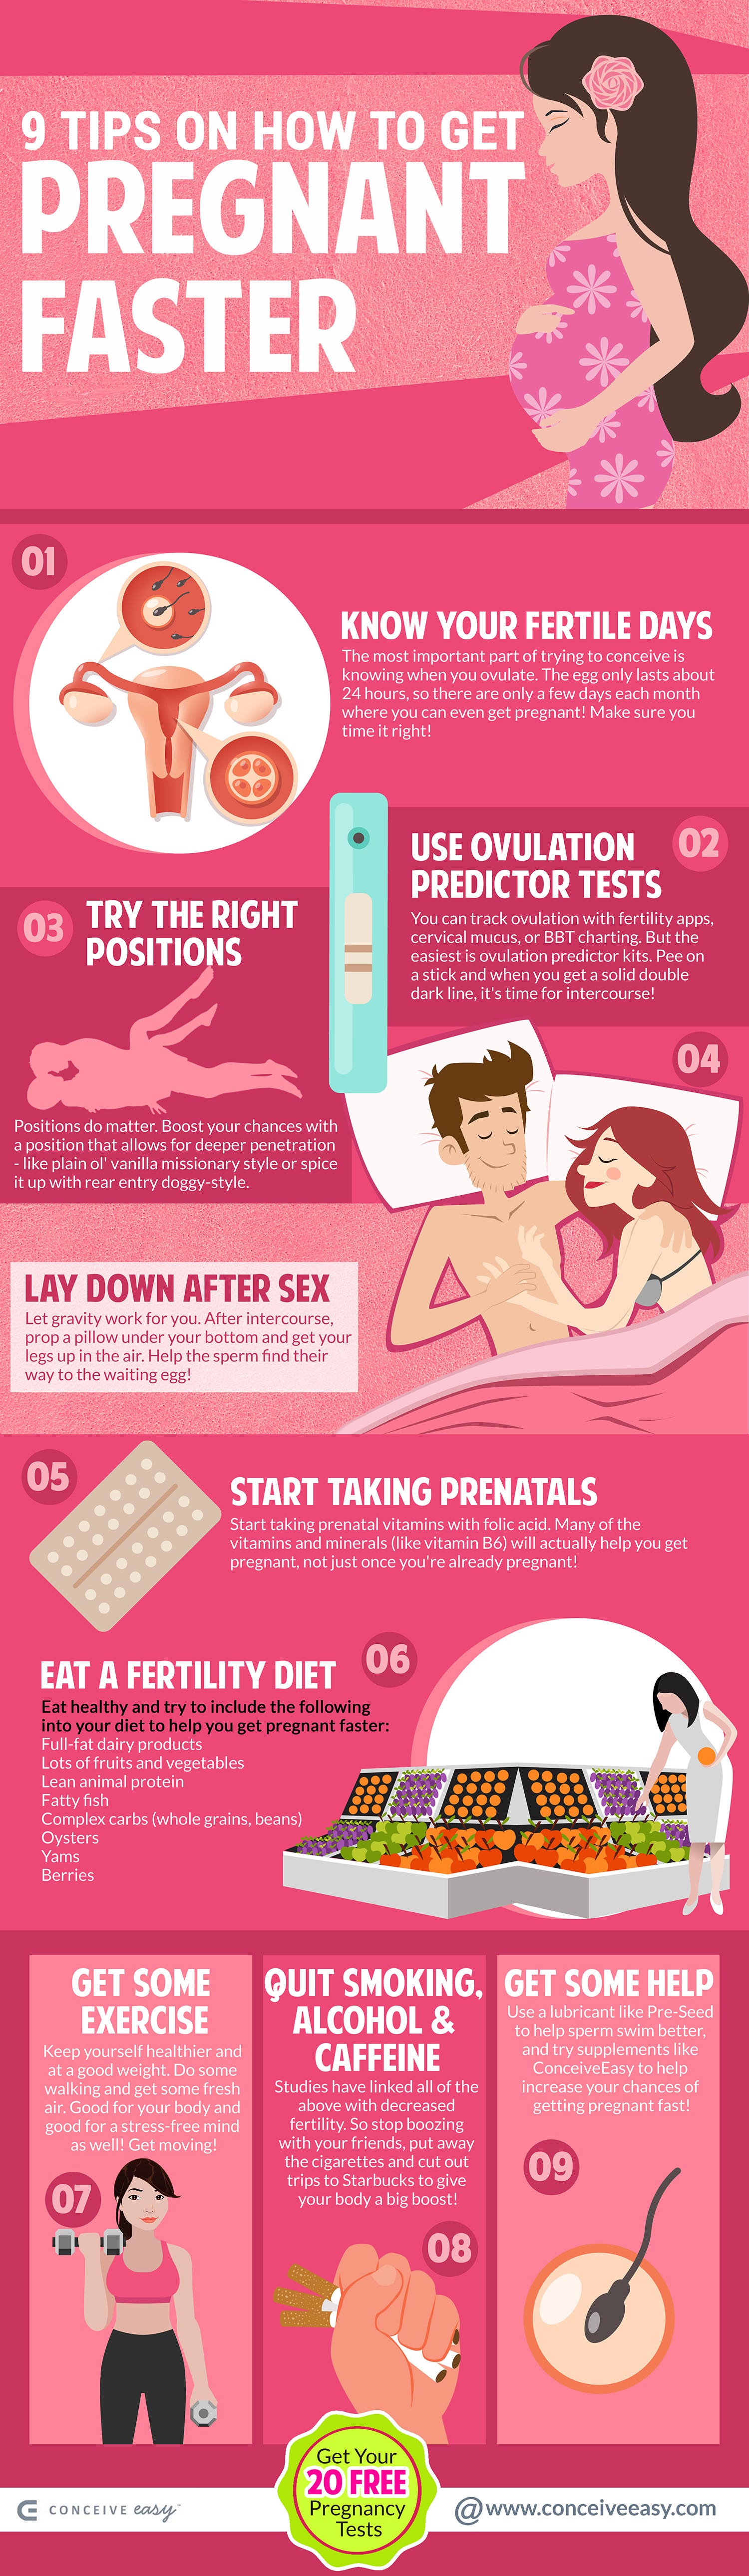 9 tips on how to get pregnant faster infographic – conceive easy